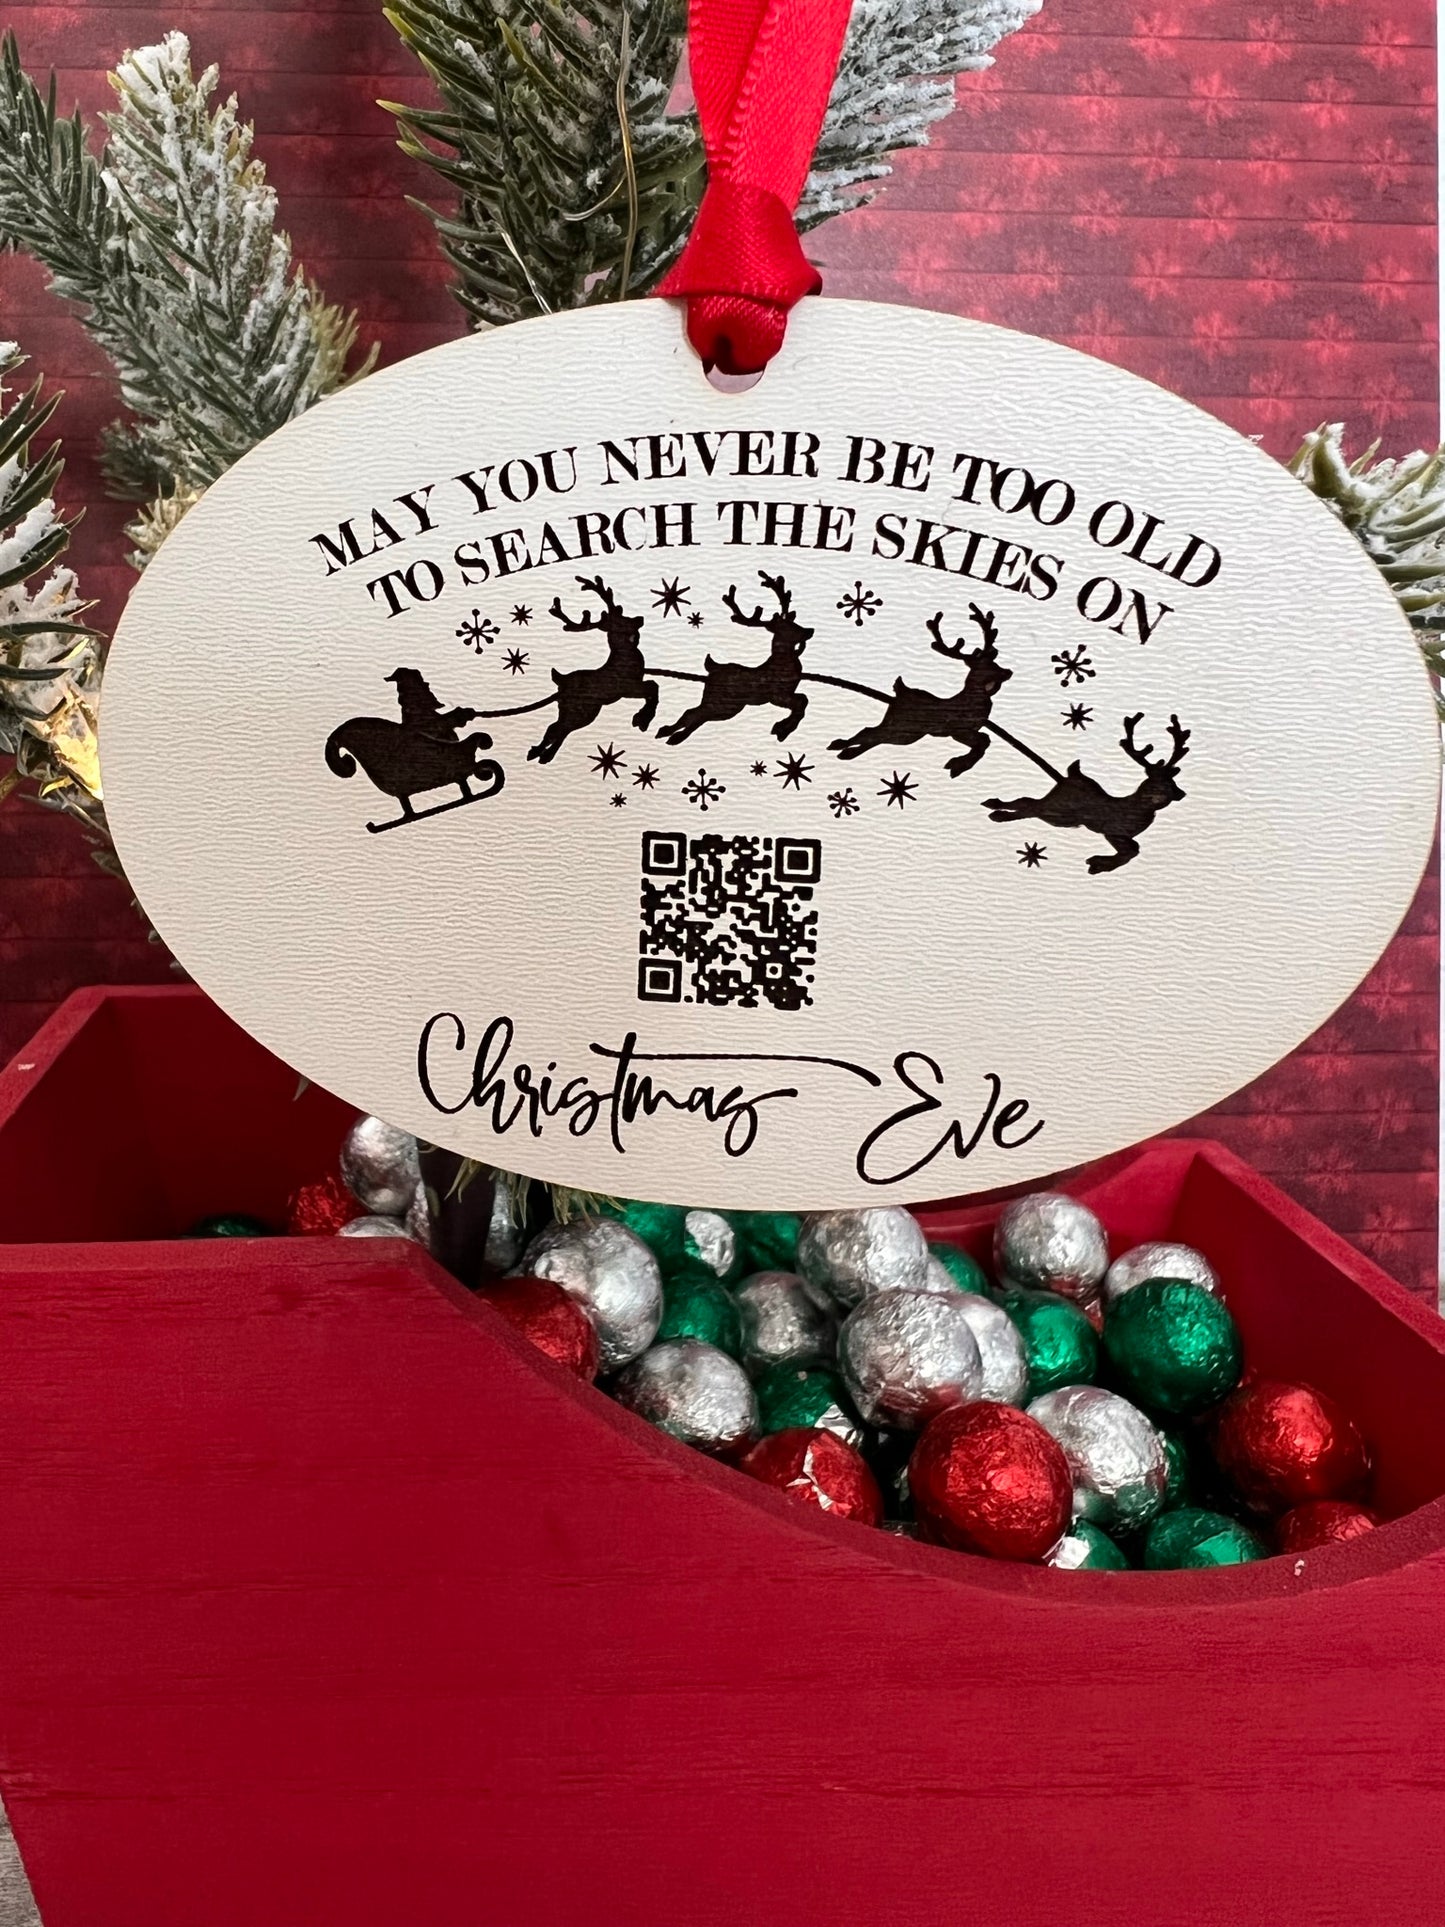 May You Never Be Too Old To Search The Skies On Christmas Eve Ornament w/QR Code